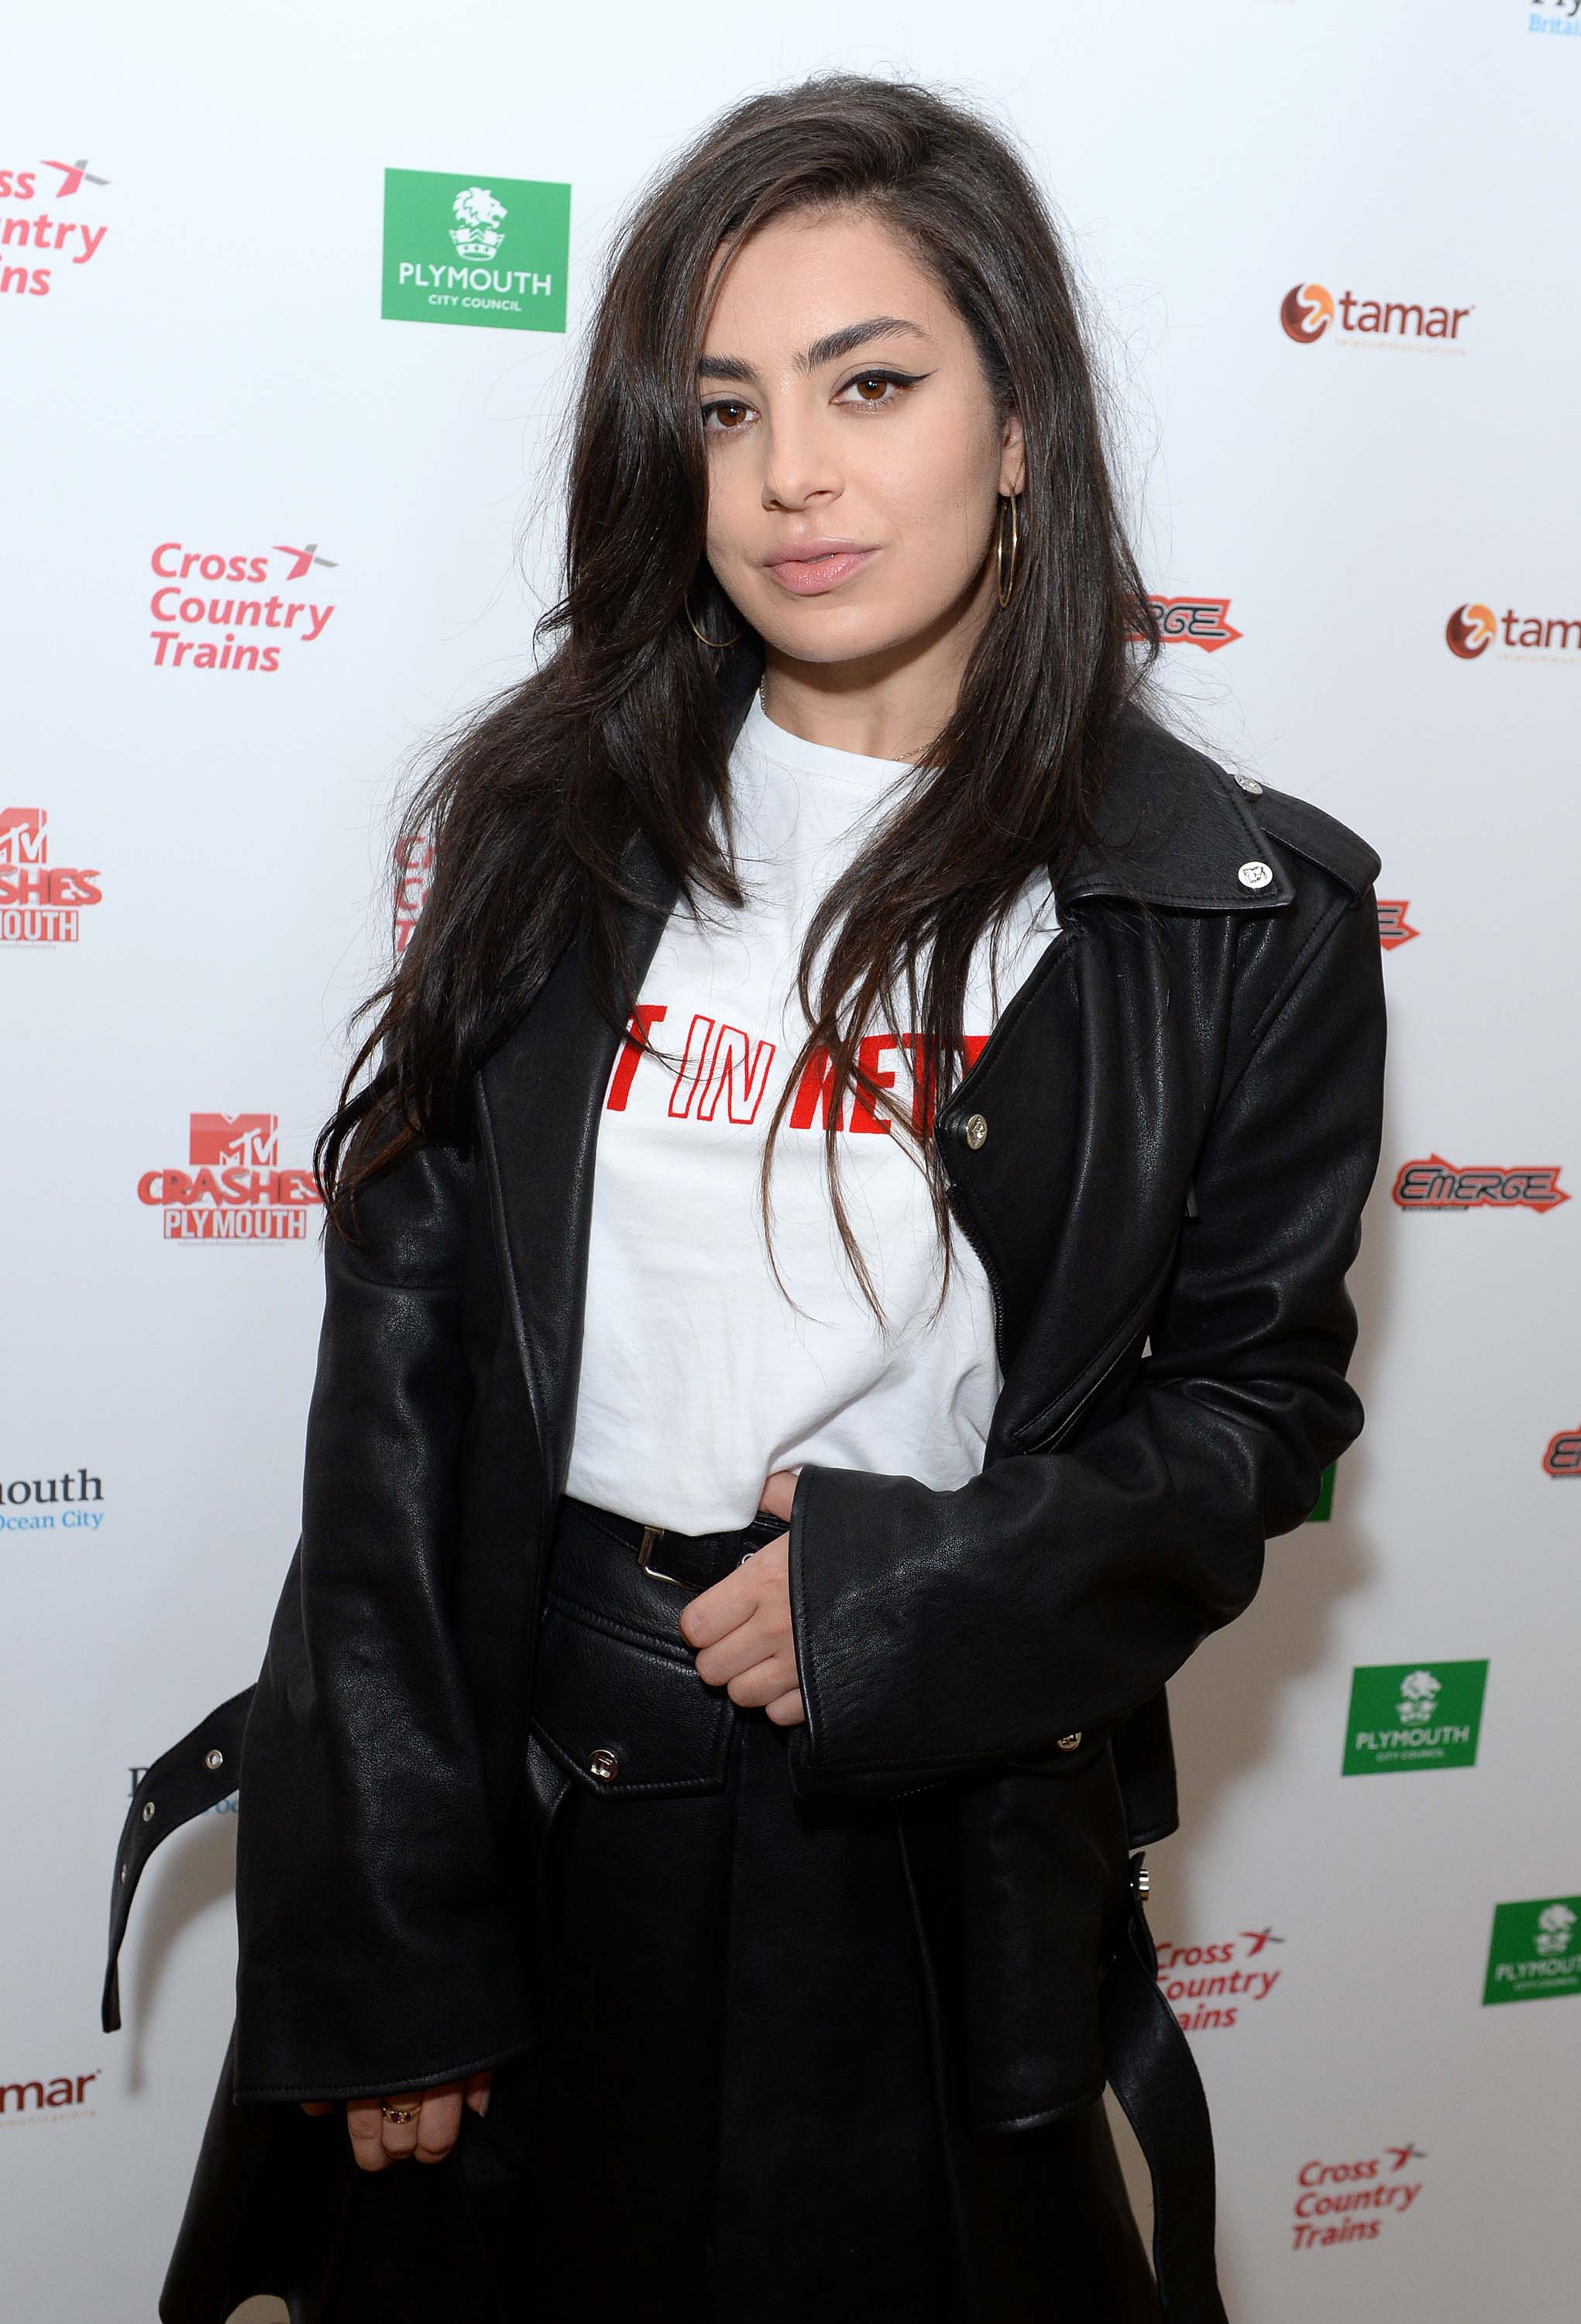 Charli XCX attends MTV Crashes Plymouth